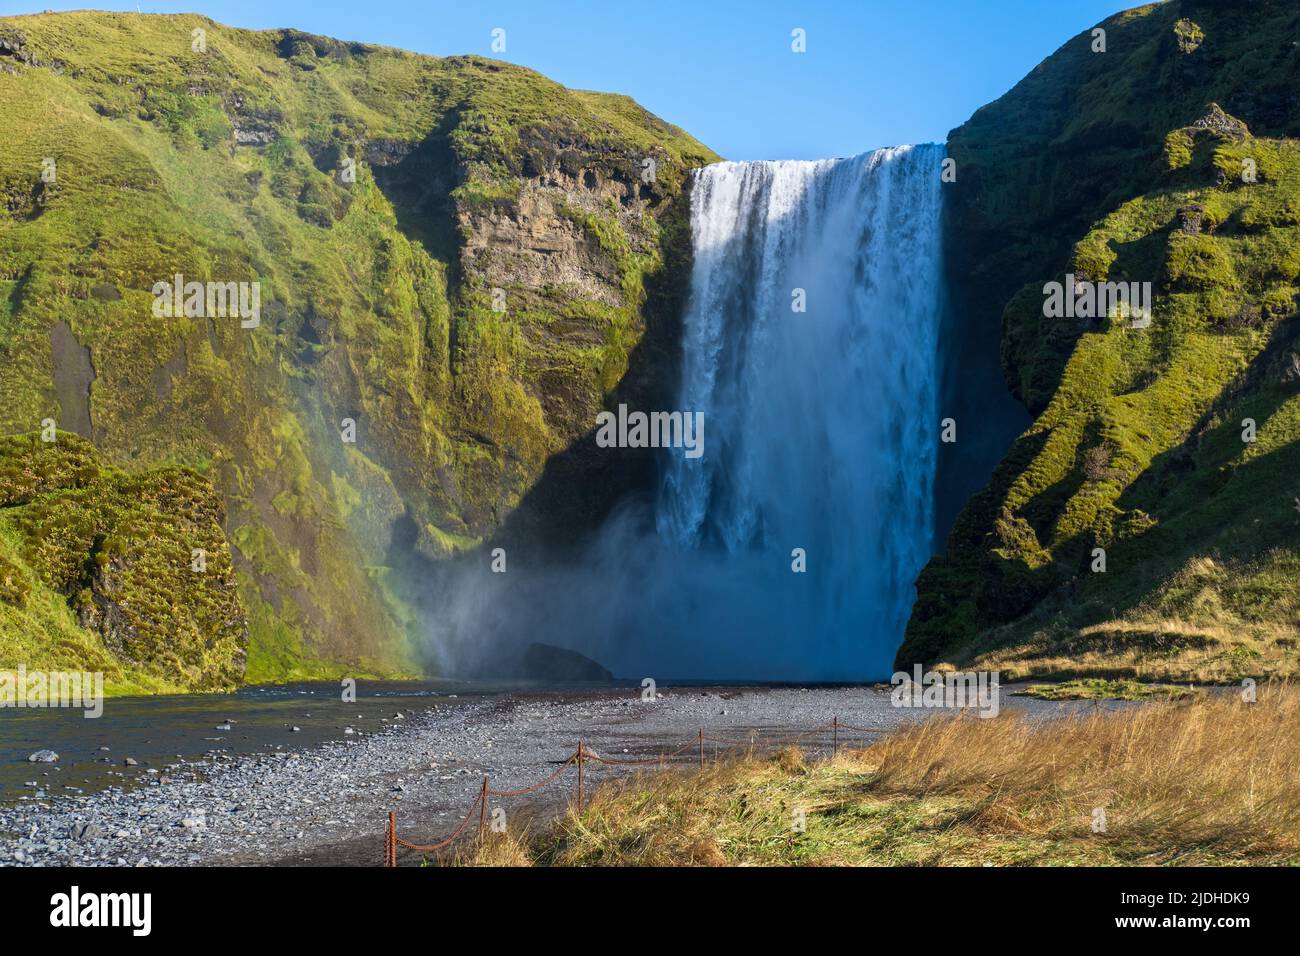 Picturesque full of water big waterfall Skogafoss autumn view, southwest Iceland. Stock Photo